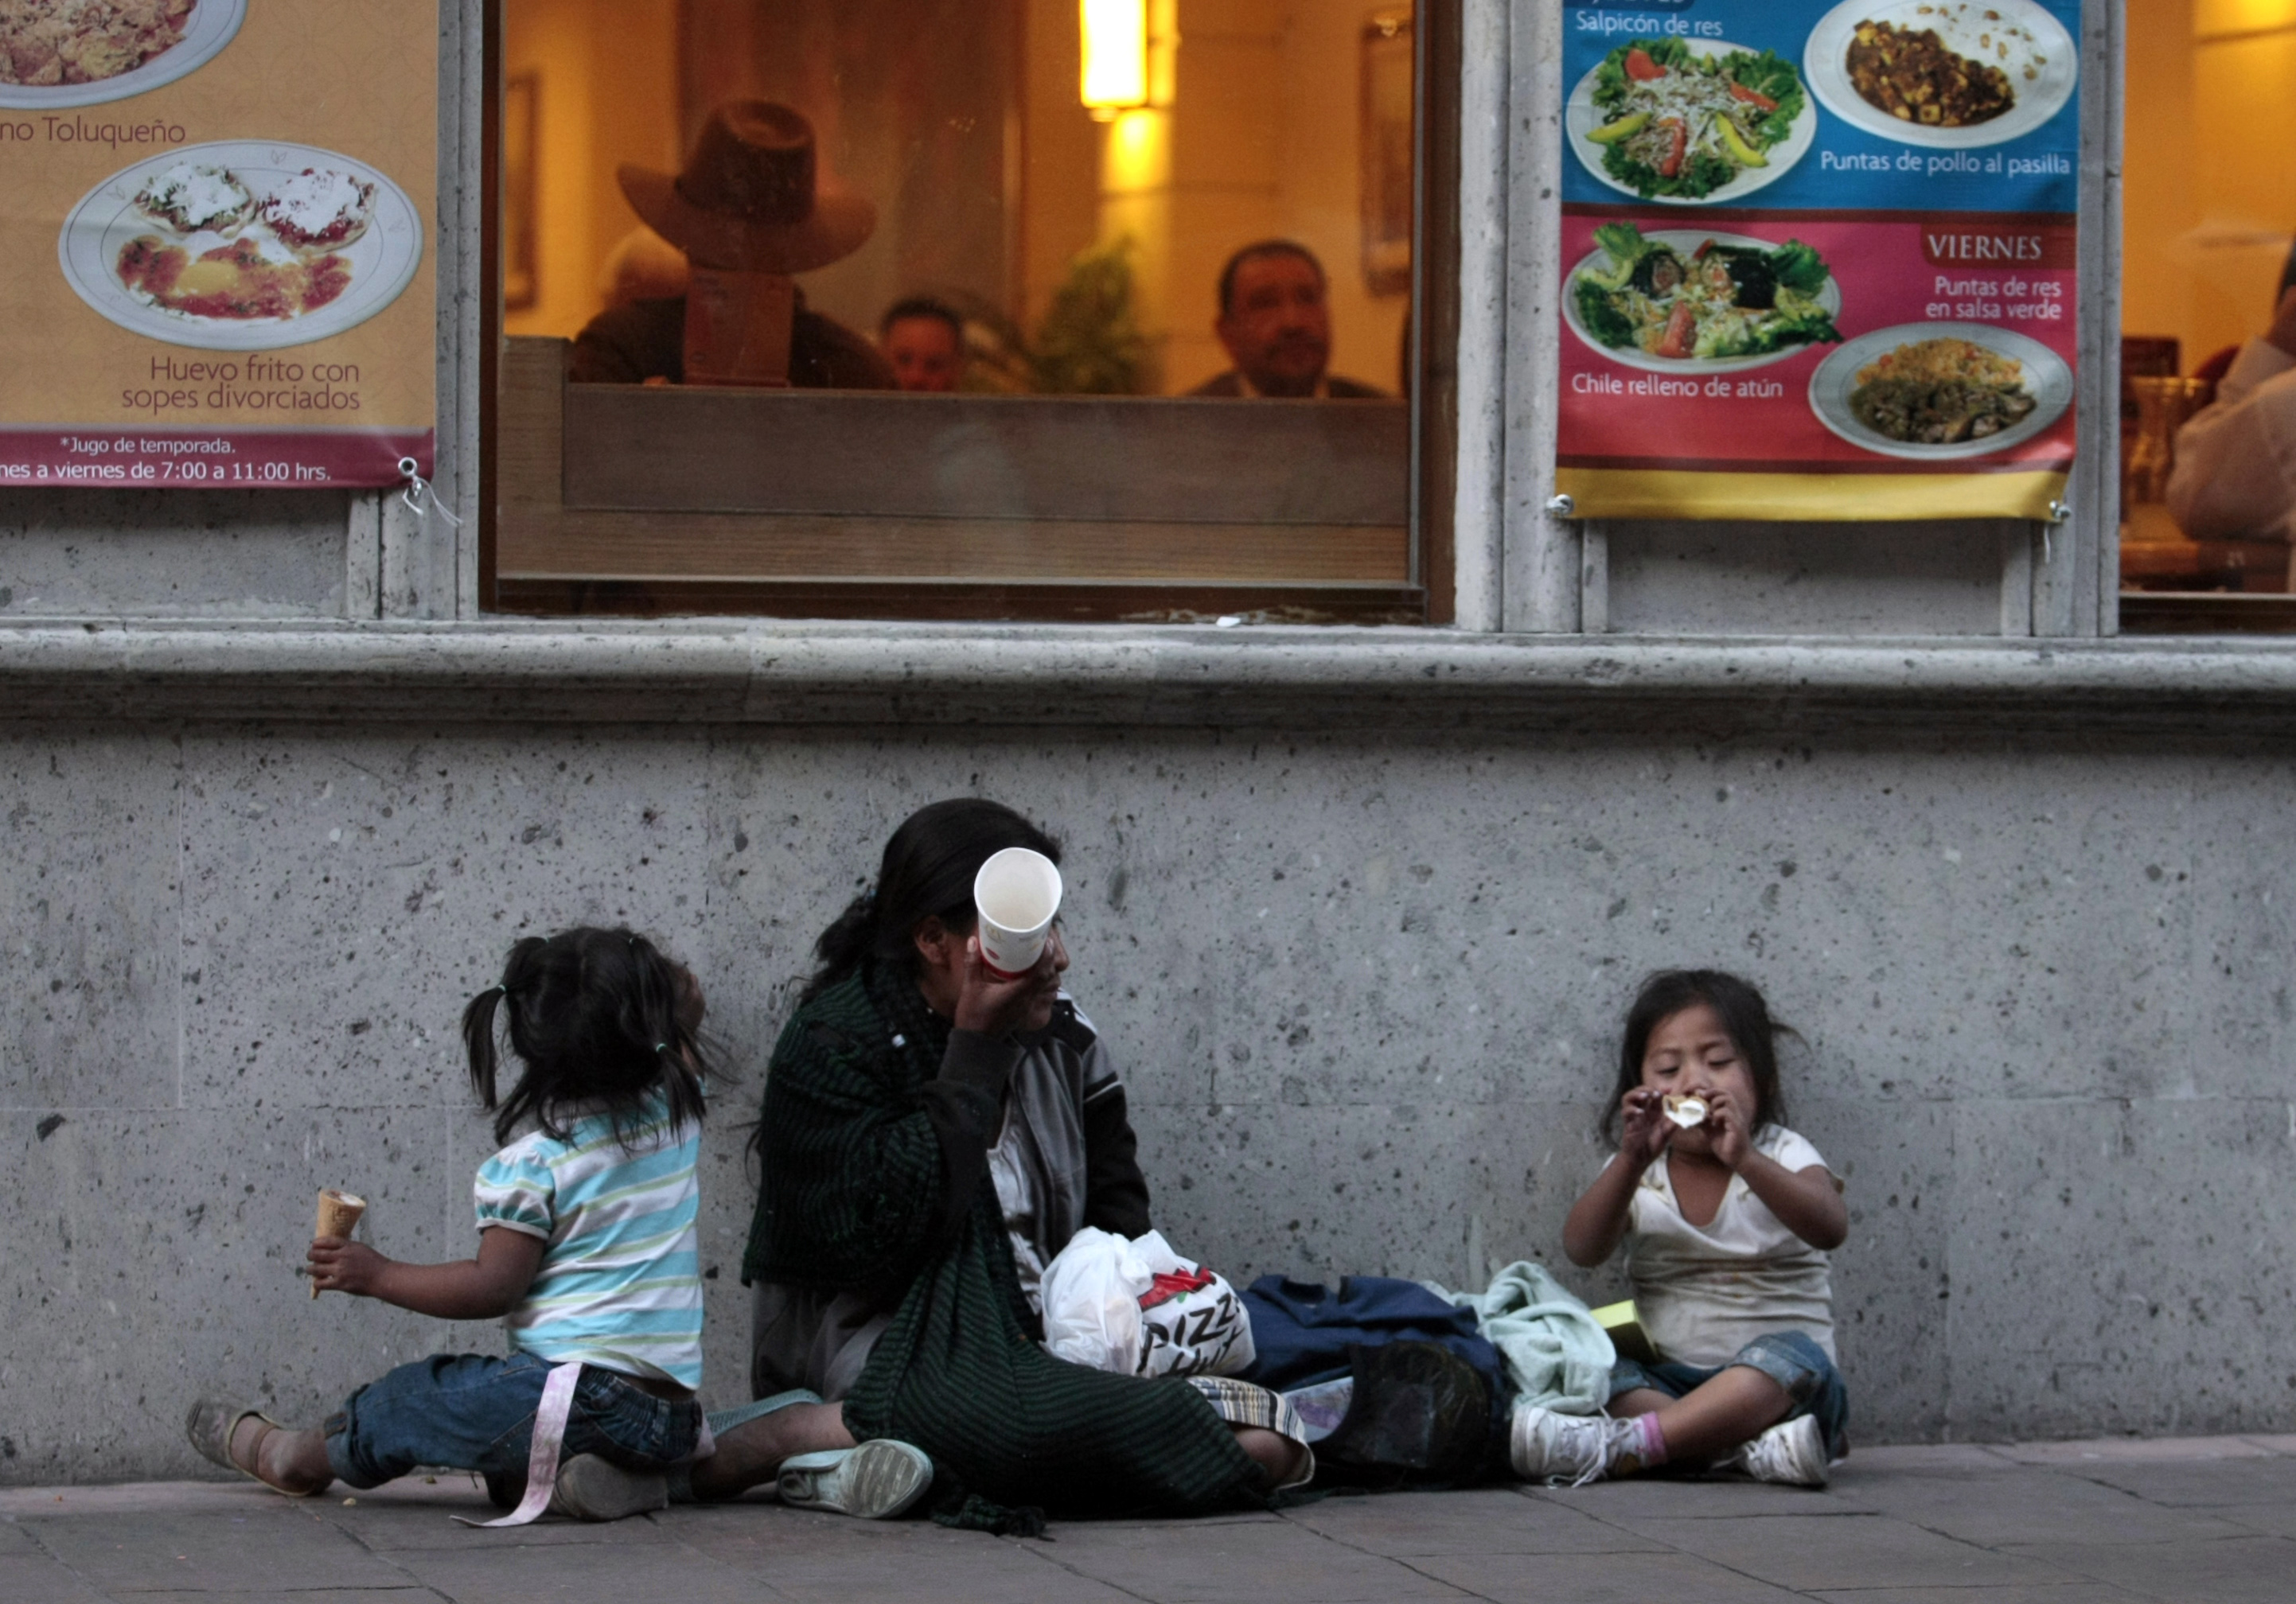 A homeless woman and her children sit outside a restaurant as she waits to receive a handout in Mexico City's historic Zocalo Square December 10, 2008. Picture taken on Dec 10. REUTERS/Henry Romero(MEXICO)